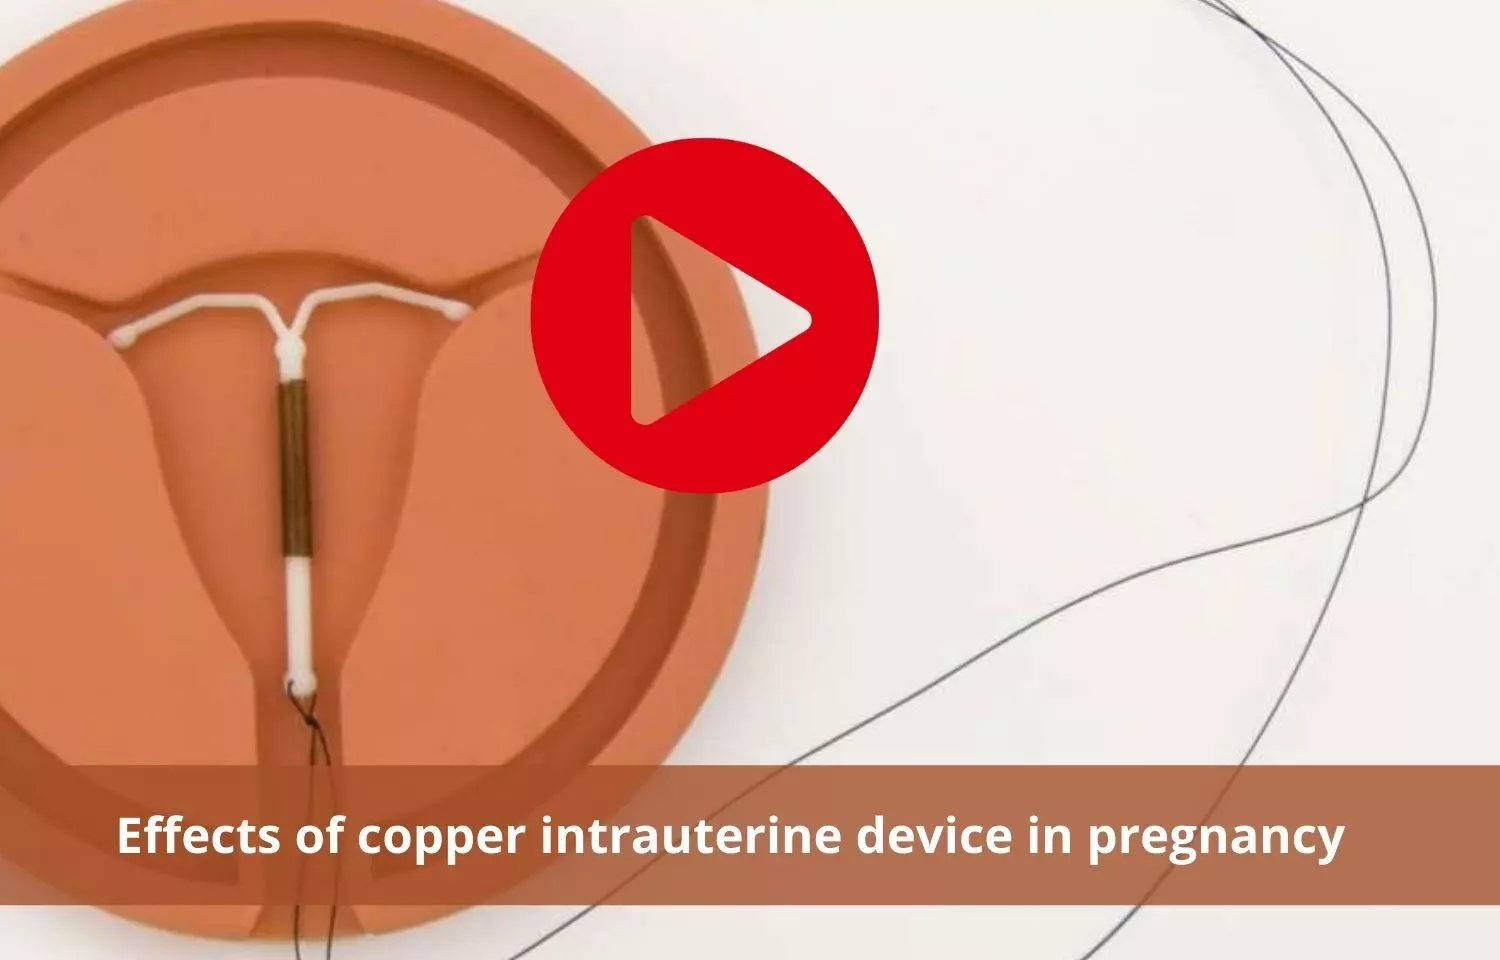 Copper interuterine devices in pregnancy and its effects